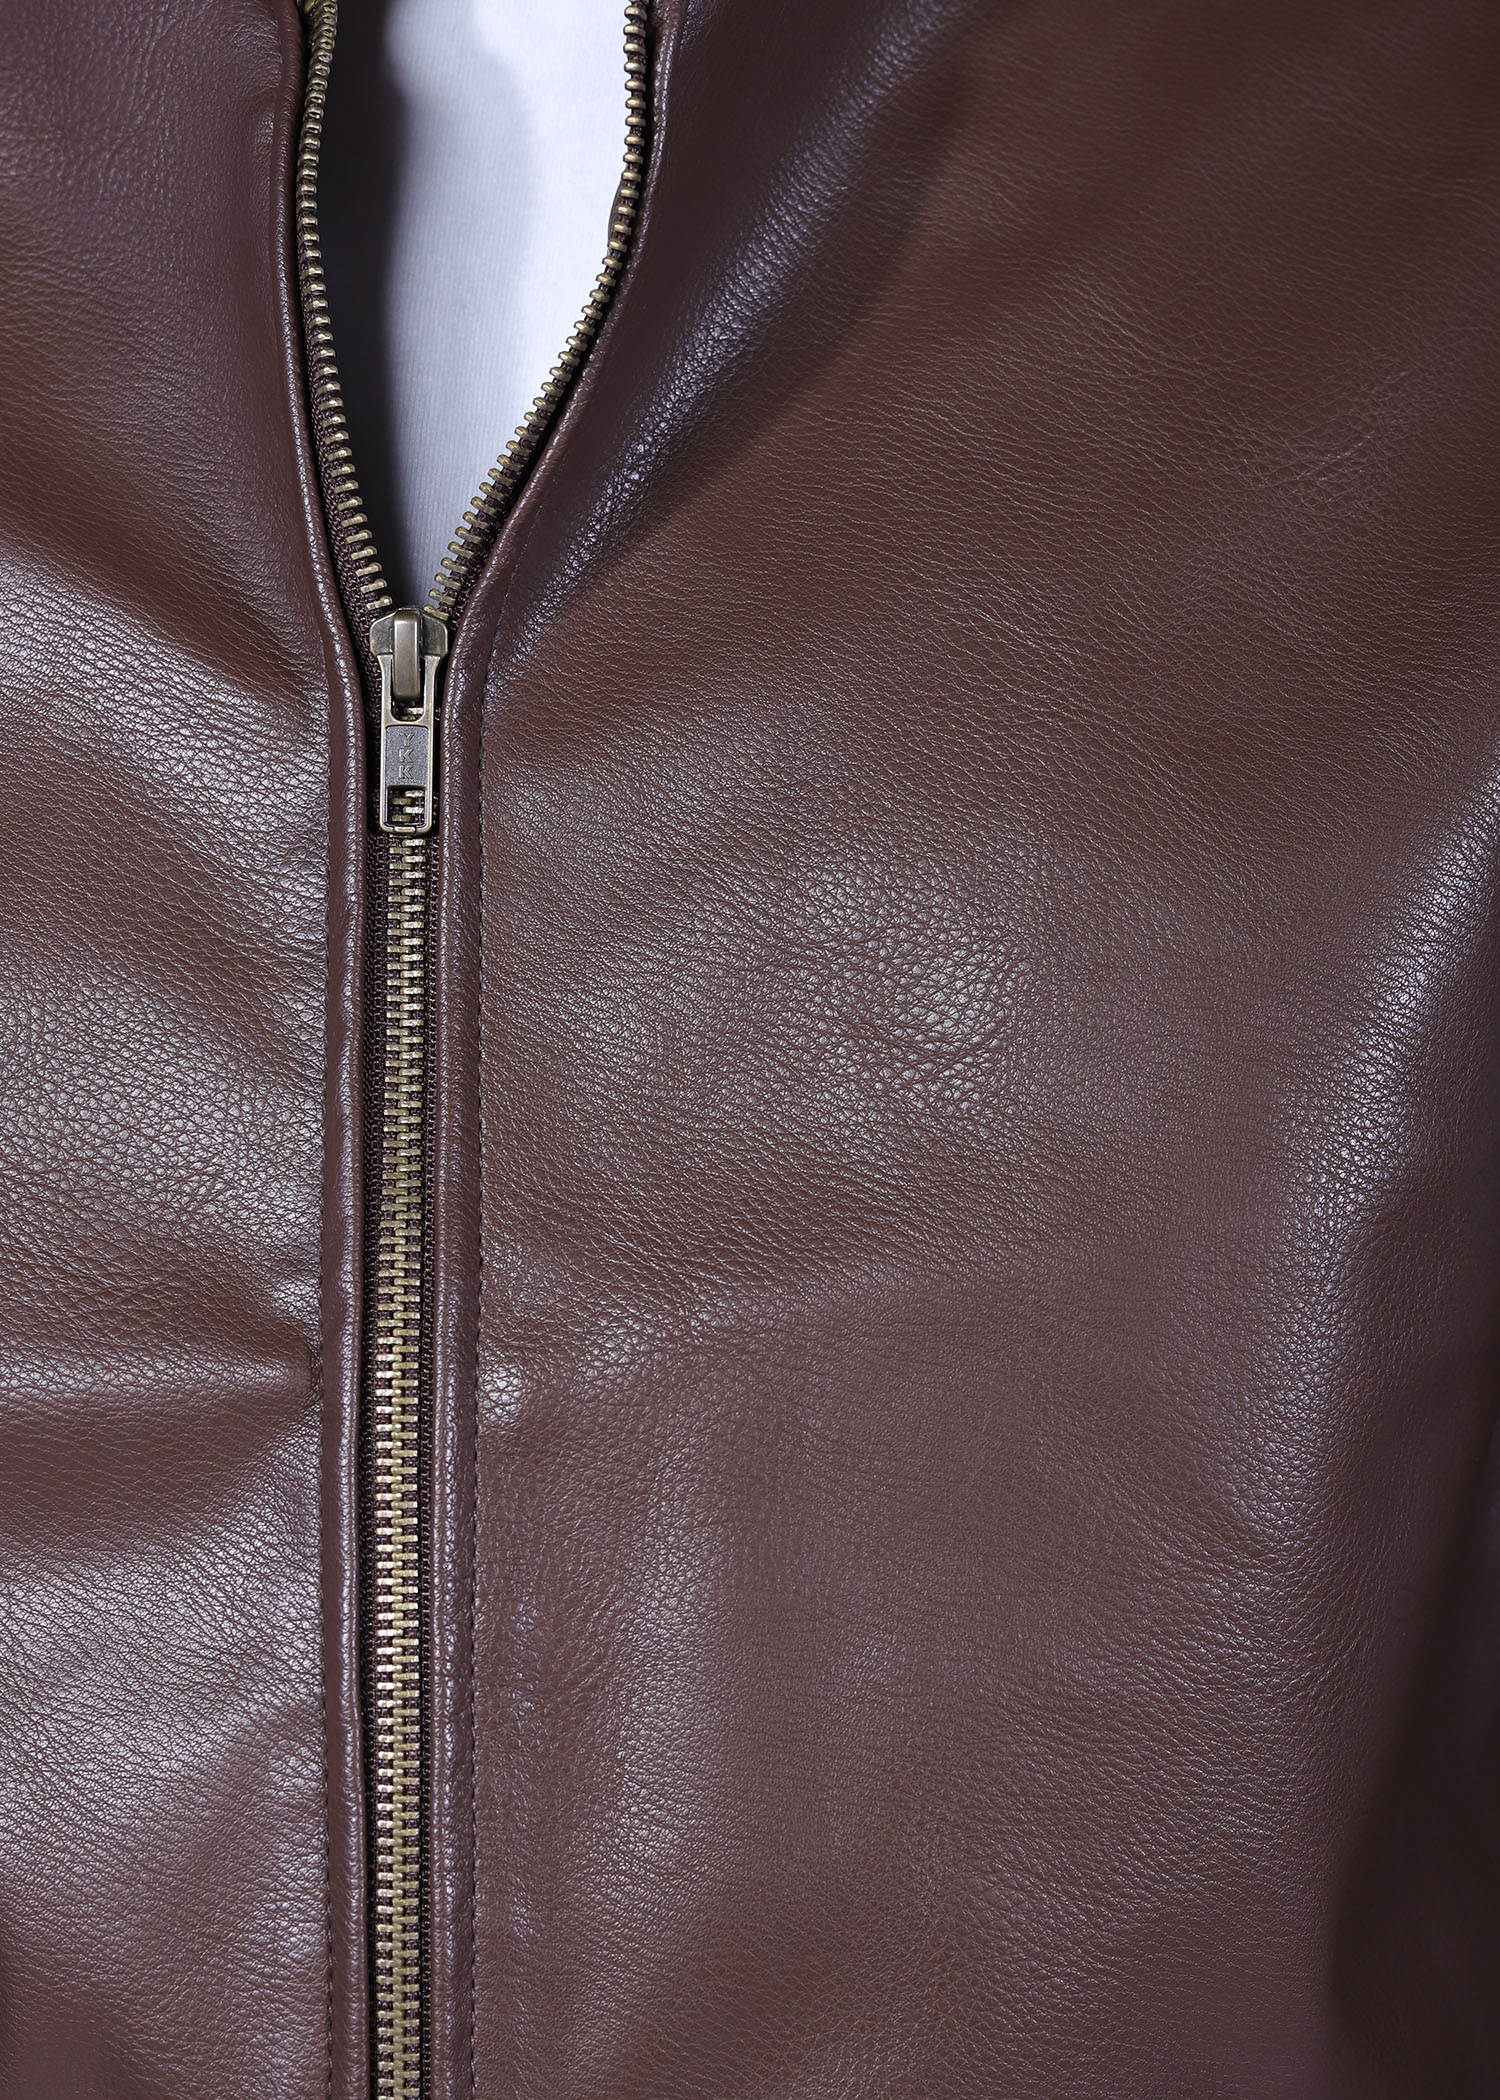 sunbittern leather jacket brown color close front view